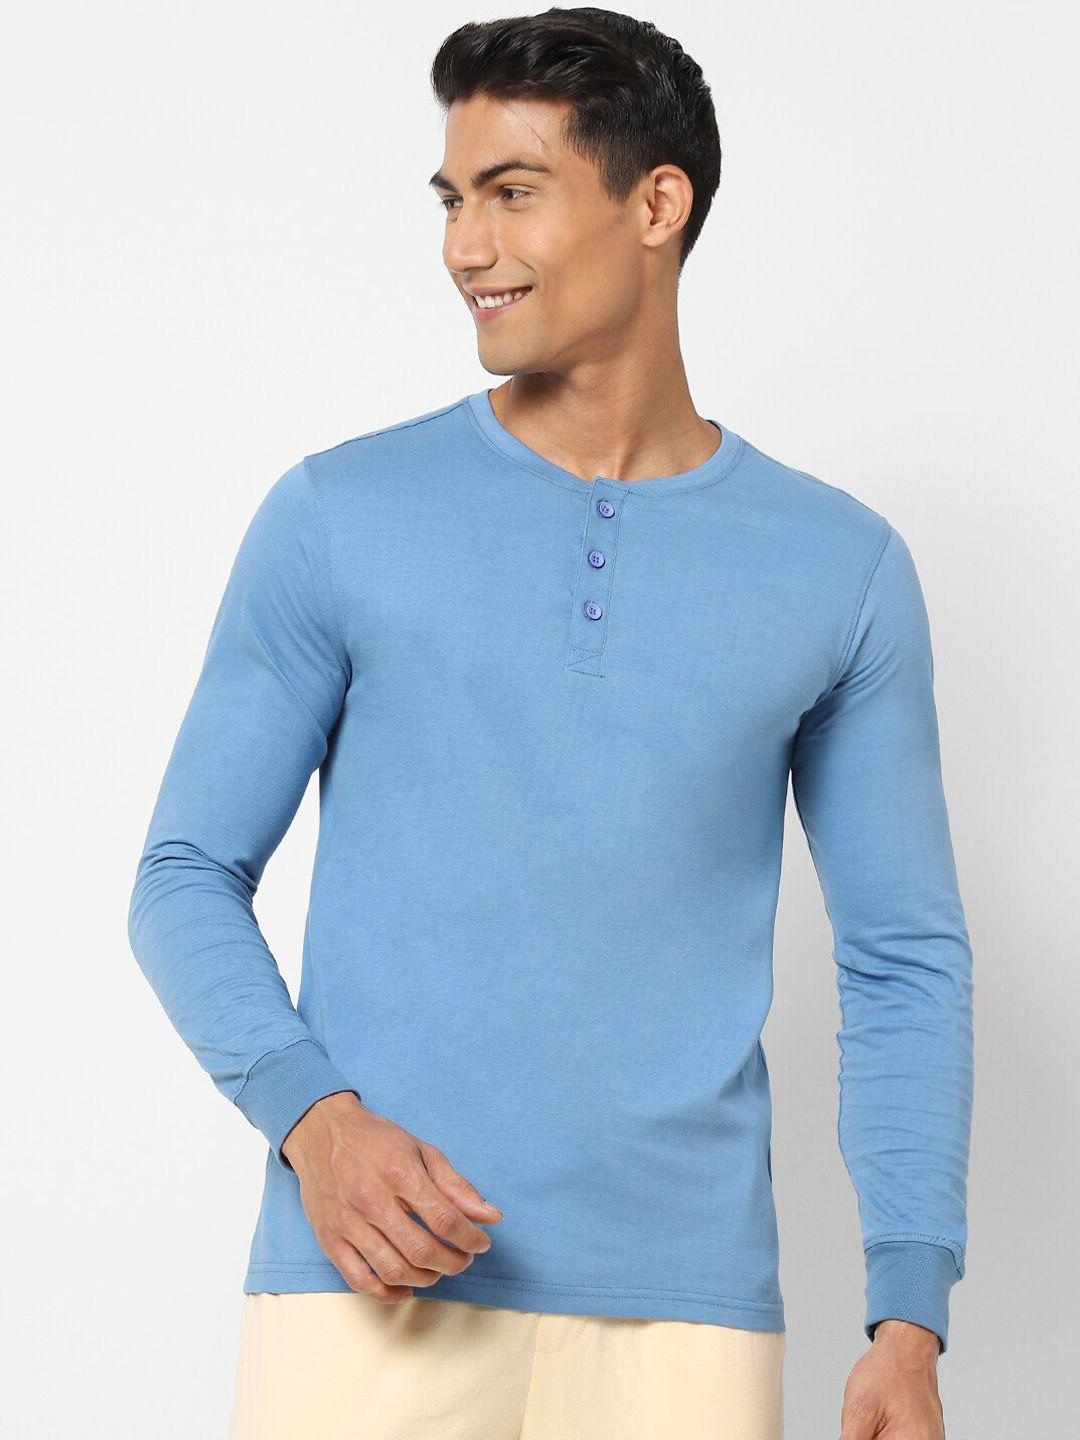 ajile-by-pantaloons-men-blue-solid-cotton-lounge-tshirts